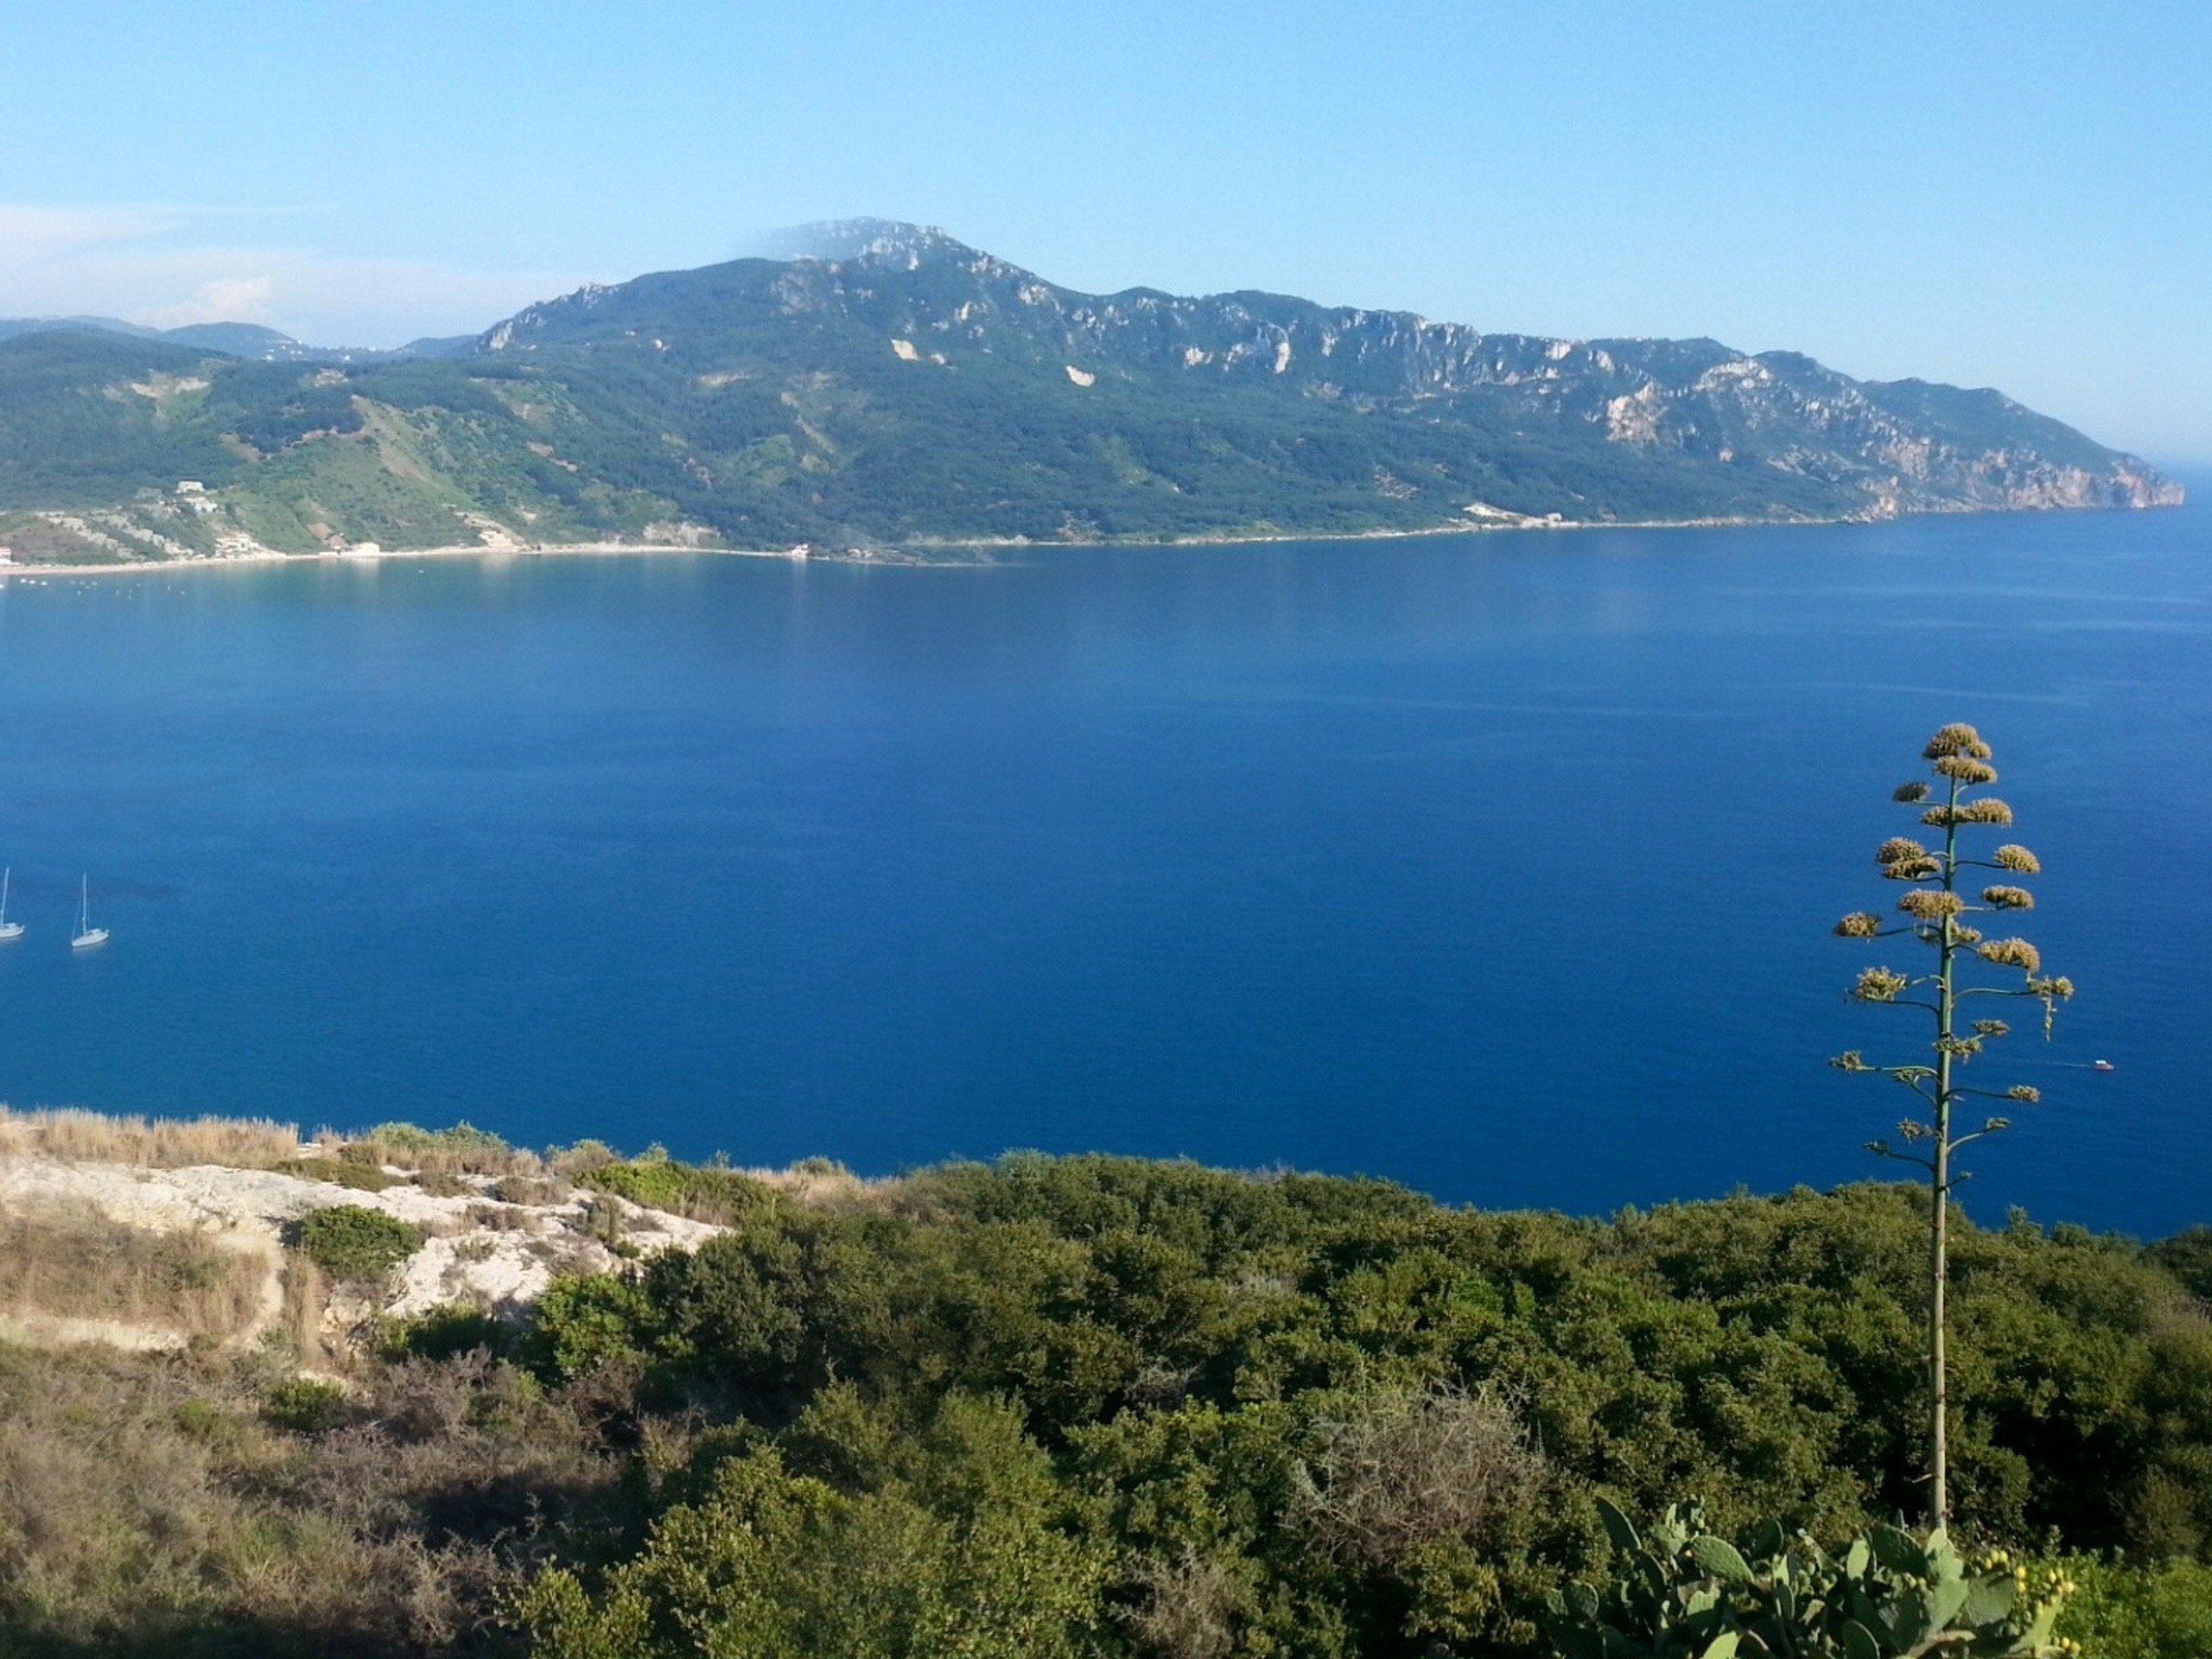 Expansive views over the bay in Corfu Island